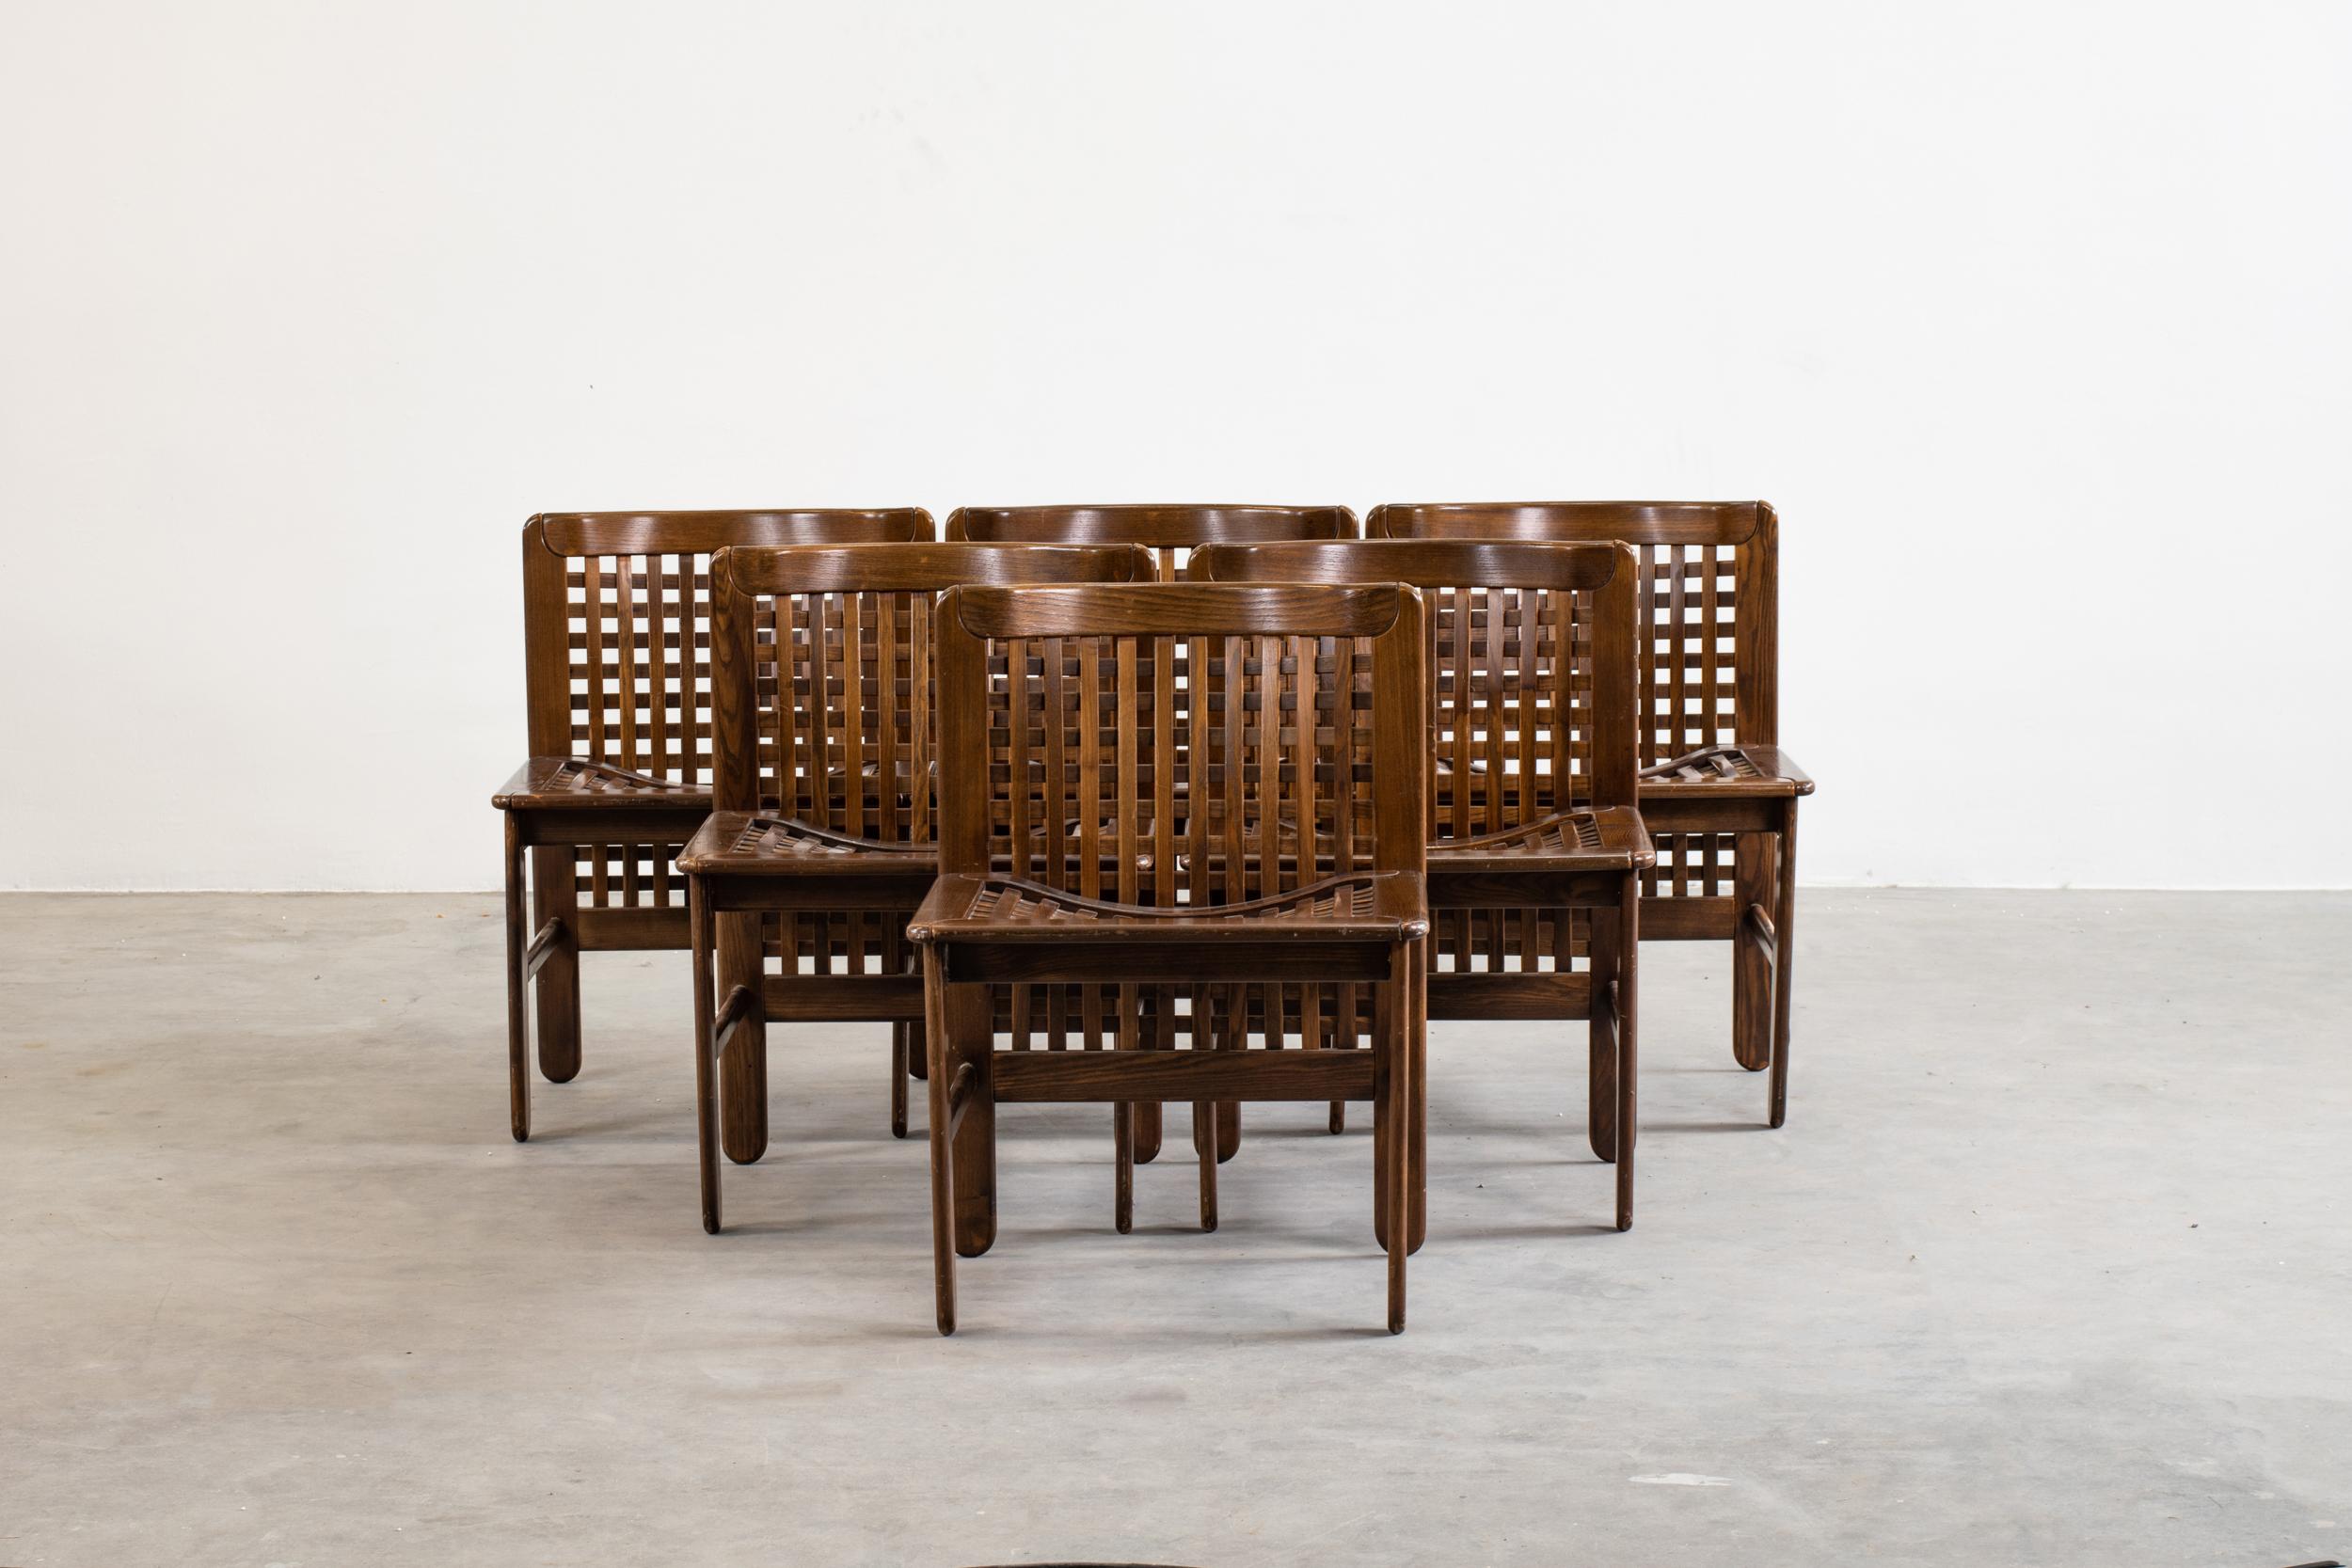 Set of six Transenna chairs in wood, designed by Titina Ammannati and Giampiero Vitelli and produced by Pozzi and Verga in 1970s.